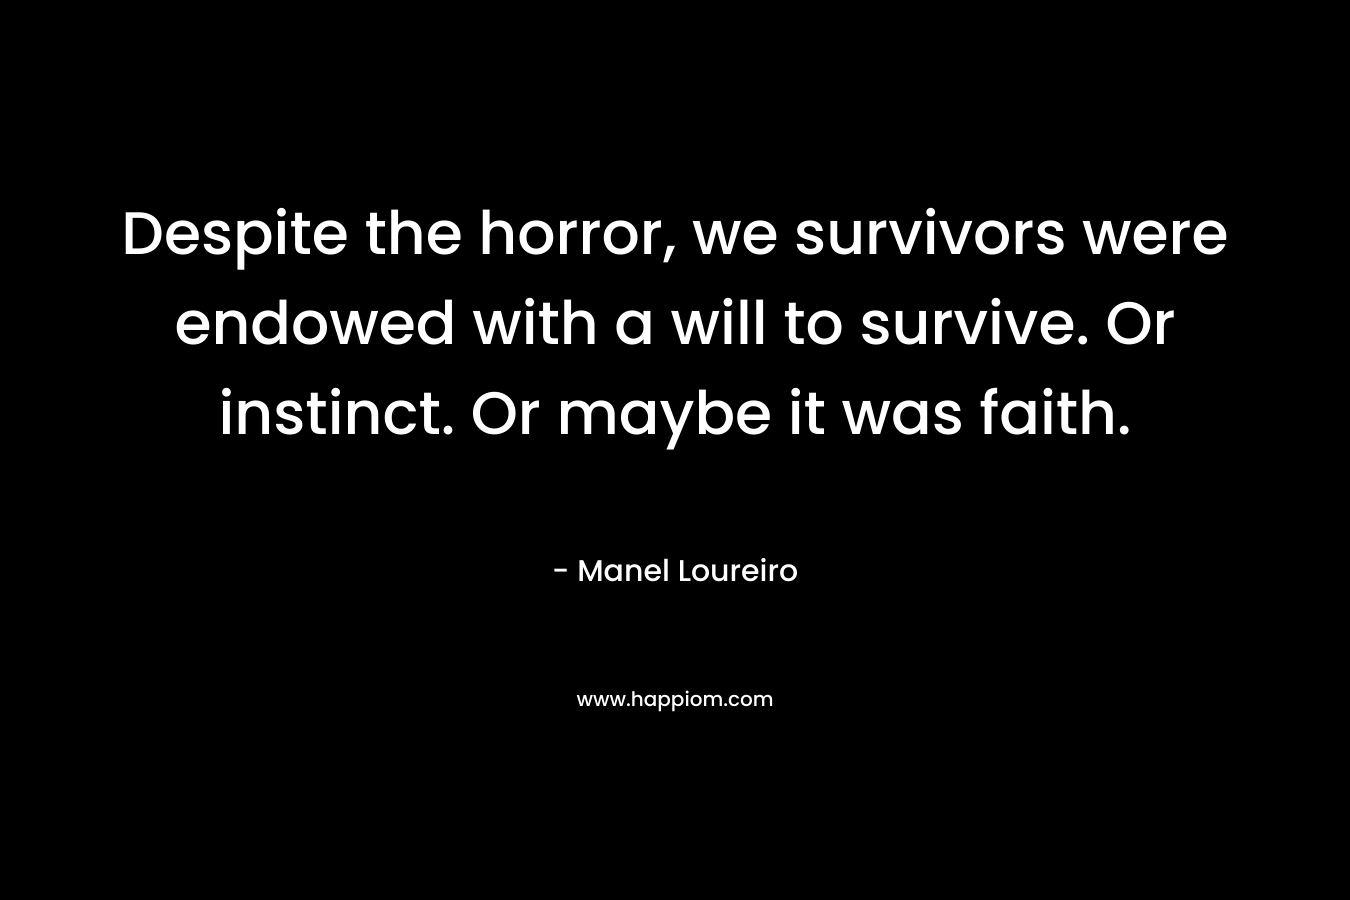 Despite the horror, we survivors were endowed with a will to survive. Or instinct. Or maybe it was faith. – Manel Loureiro